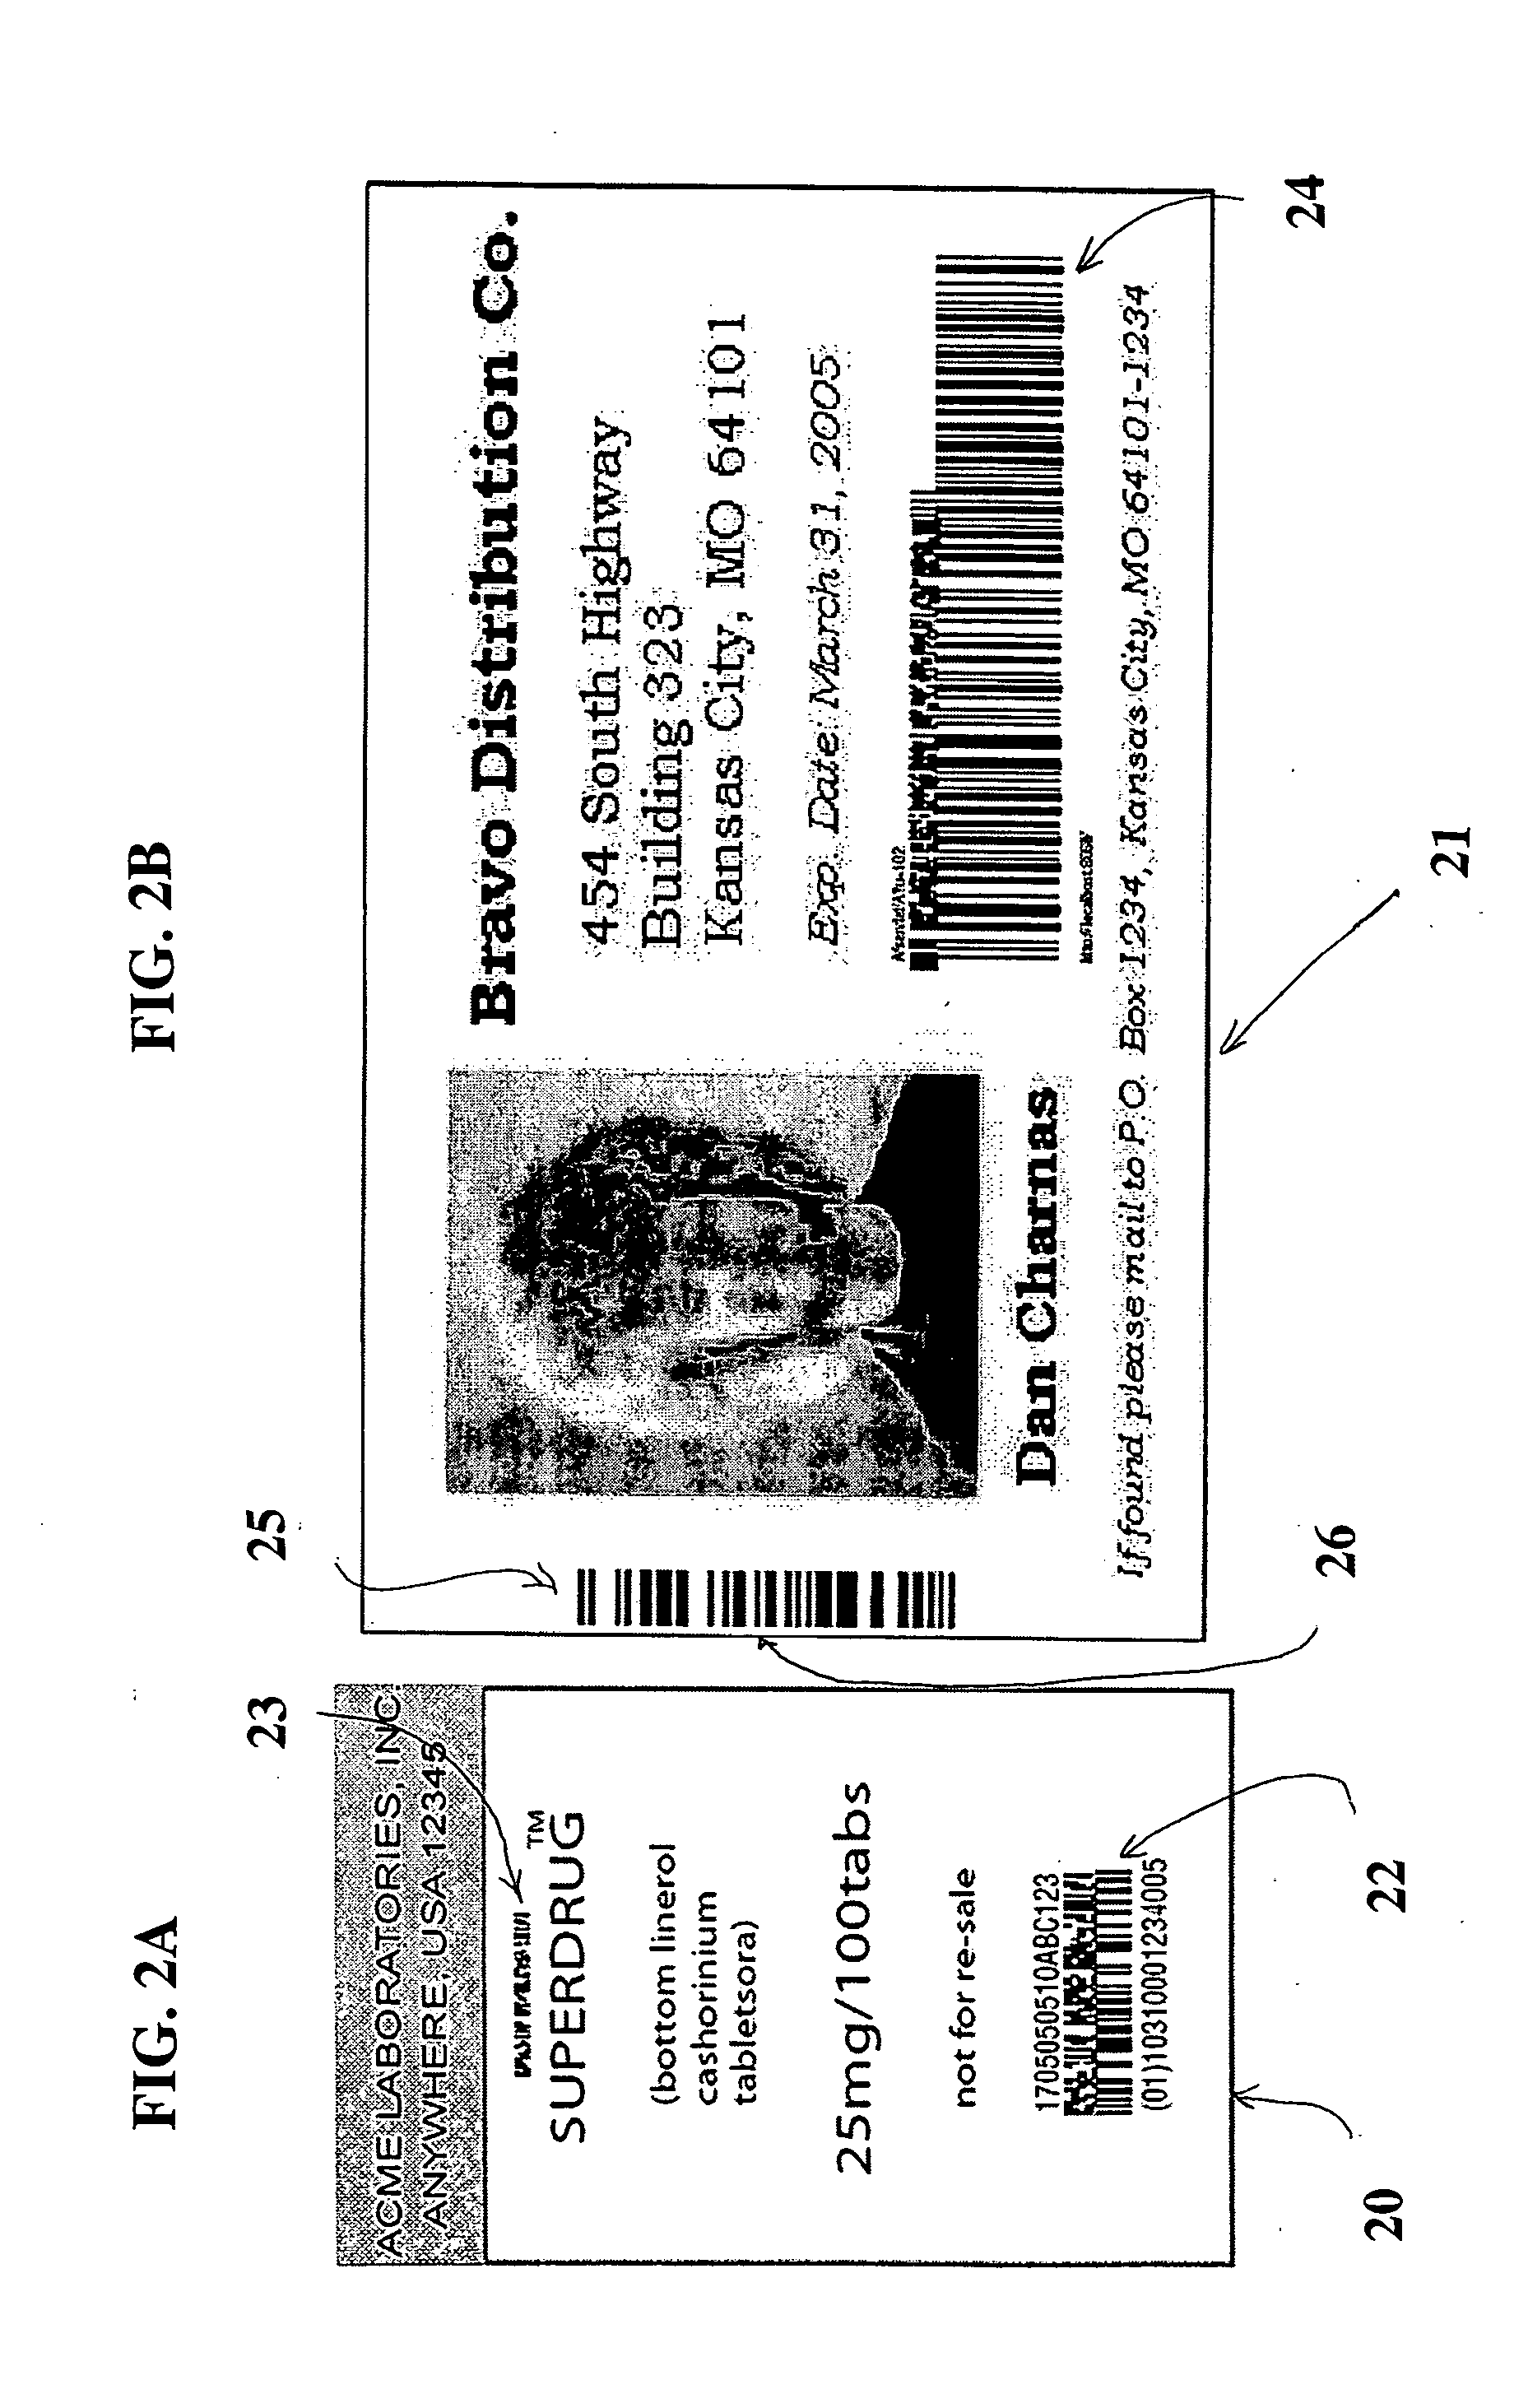 Method for improving security and enhancing information storage capability, the system and apparatus for producing the method, and products produced by the system and apparatus using the method